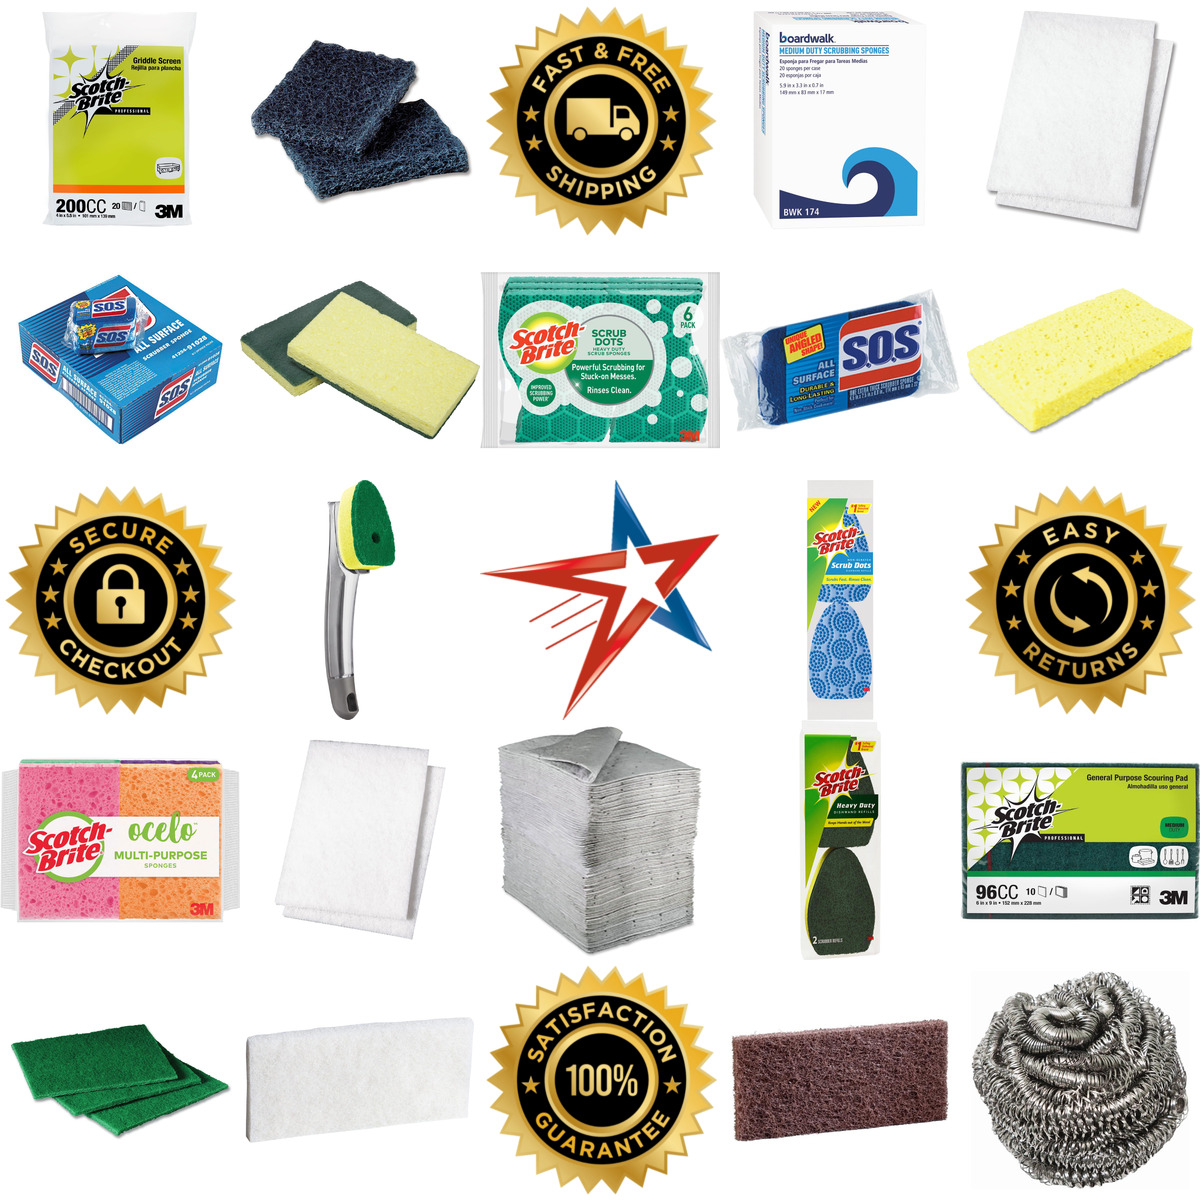 A selection of Sponges products on GoVets